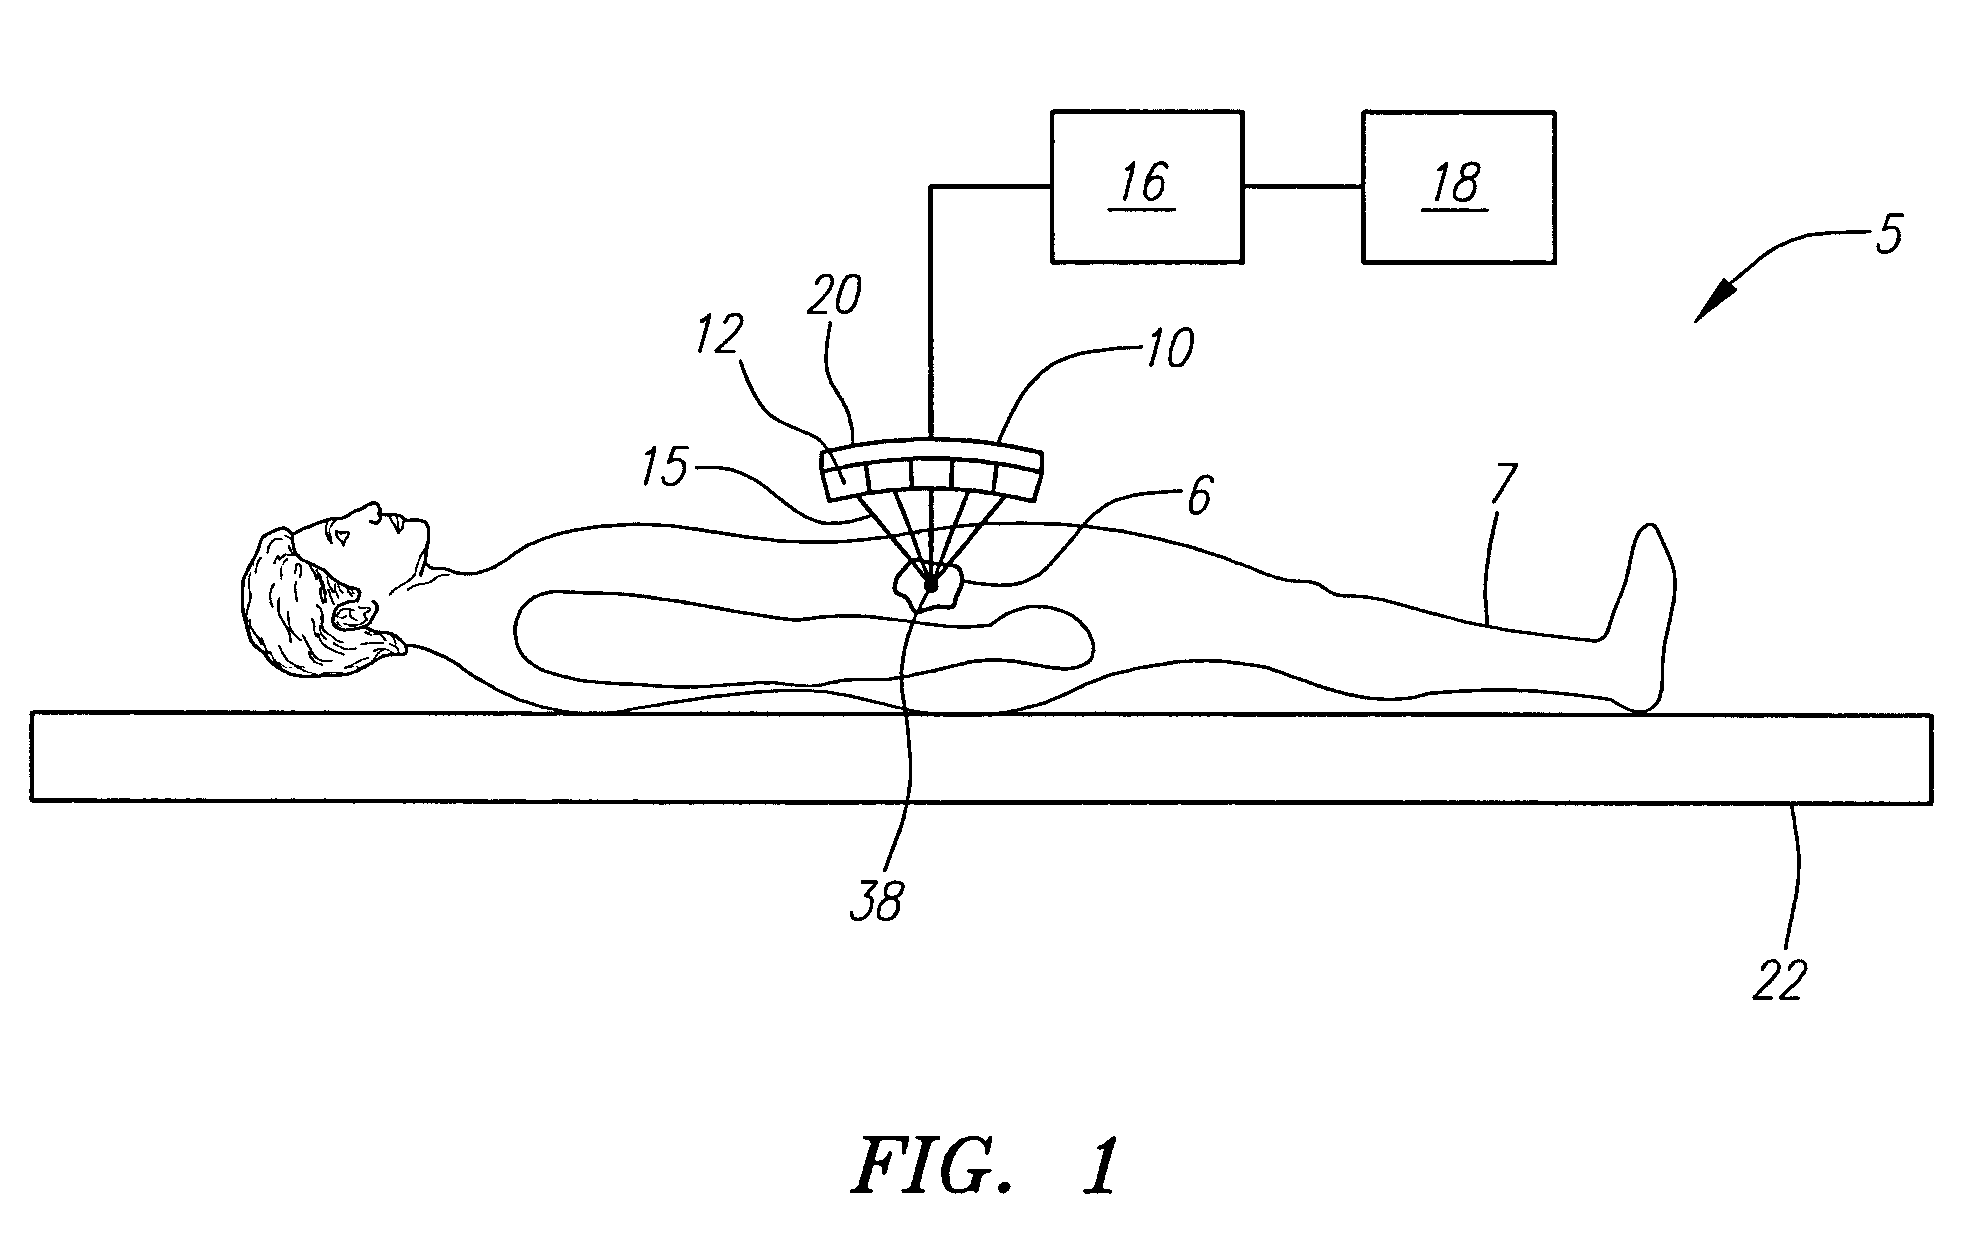 Focused ultrasound system with adaptive anatomical aperture shaping